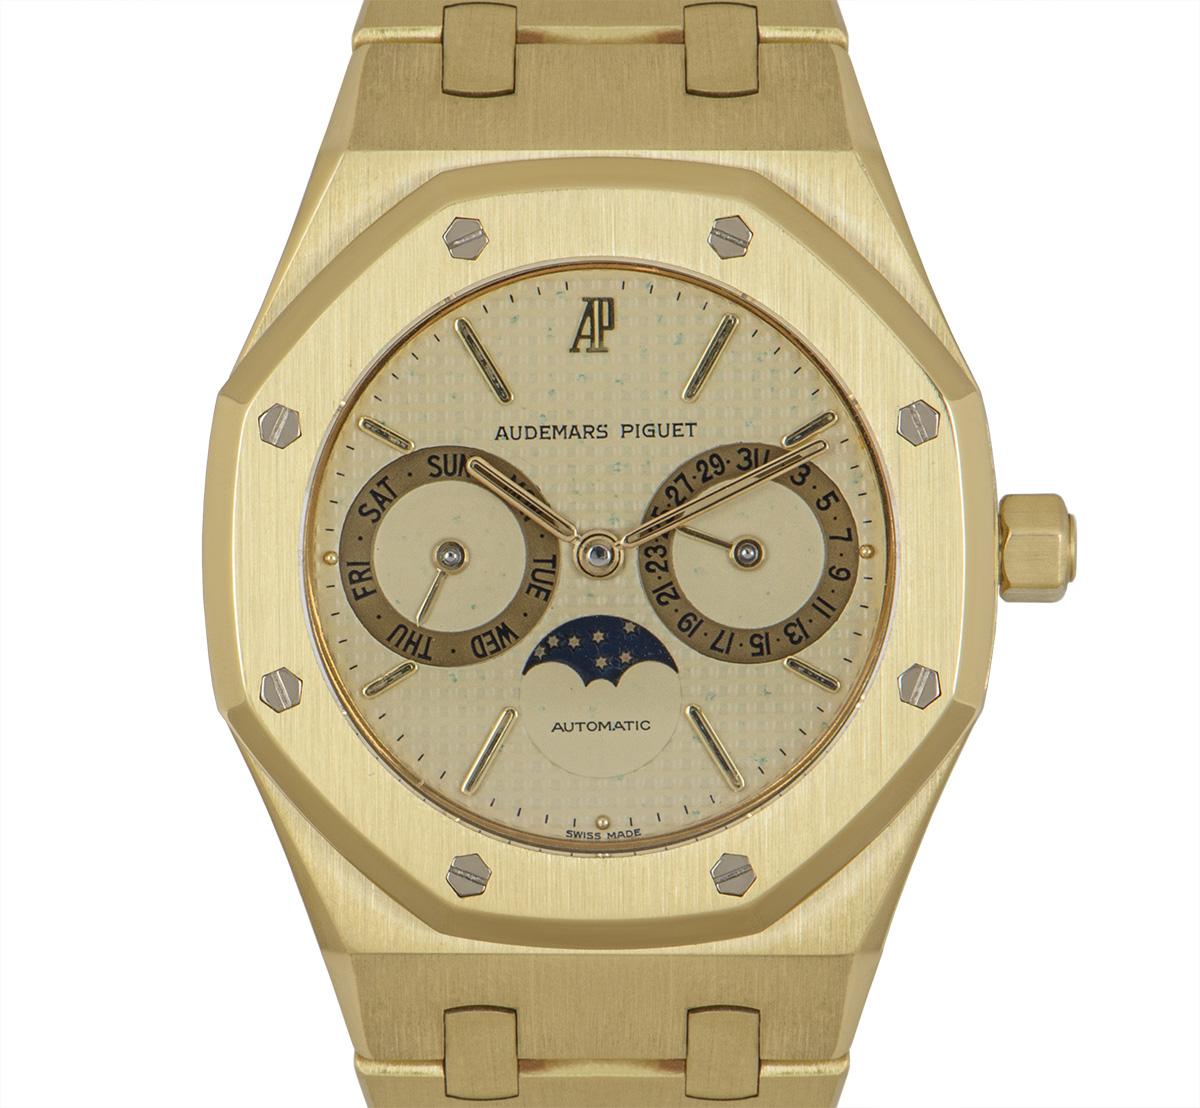 A 36 mm Royal Oak Day-Date Moon Phase in yellow gold by Audemars Piguet. Featuring a champagne waffle dial that has a day, date and moon phase display with the bezel featuring 8 iconic Audemars Piguet screws. The bracelet comes with a concealed